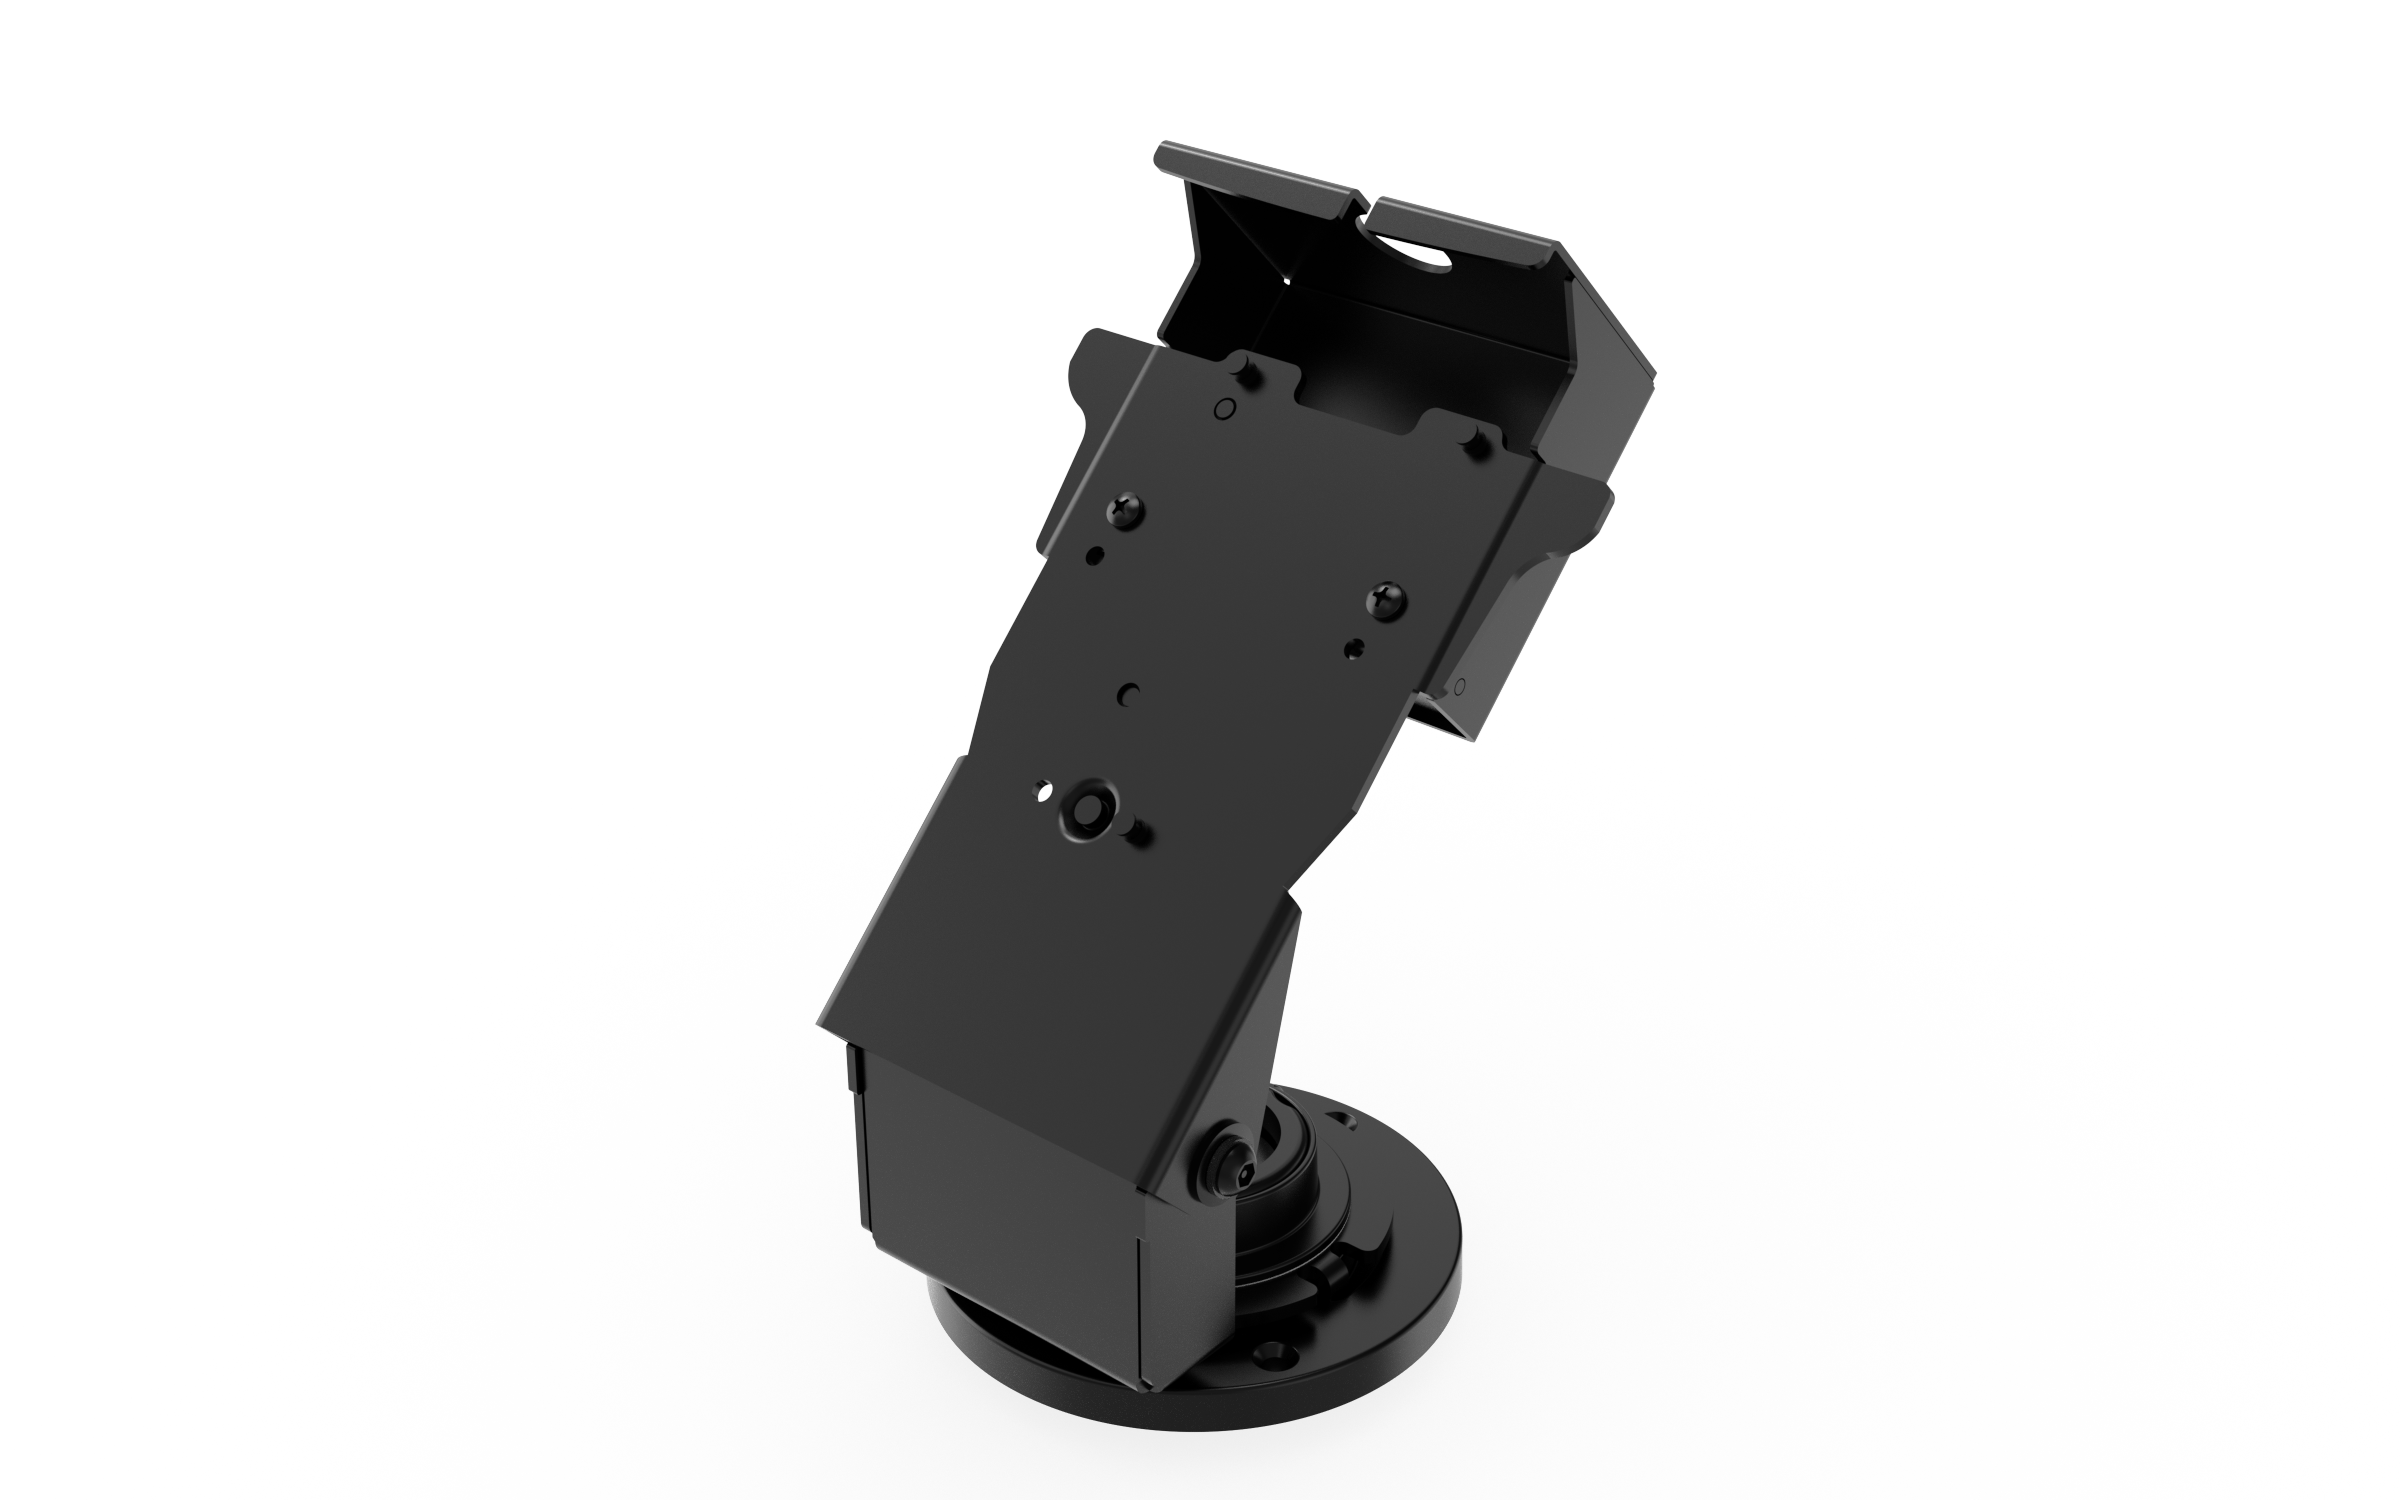 Round Base Metal Locking Stand with EMV Card Clearance with for Verifone M440 Payment Terminals